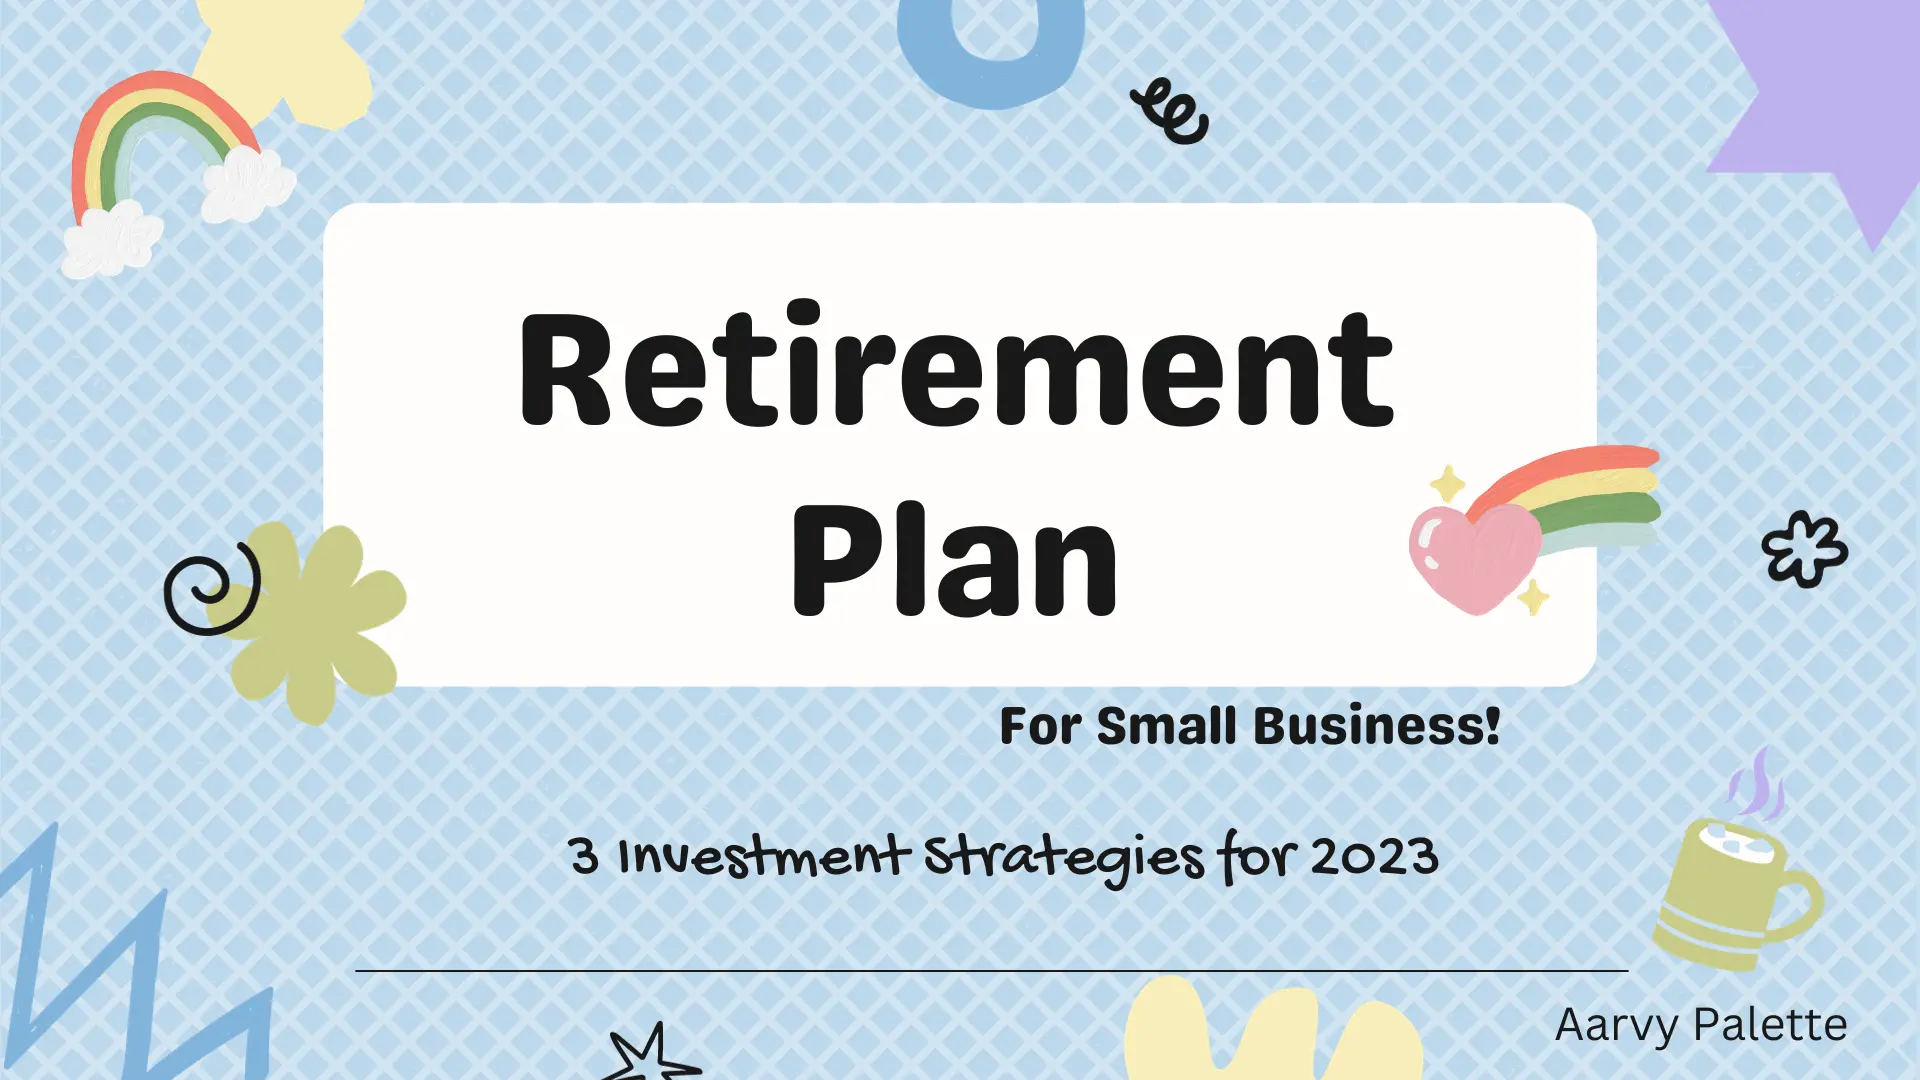 Small Business Investment Strategies 2023 - retirement plan